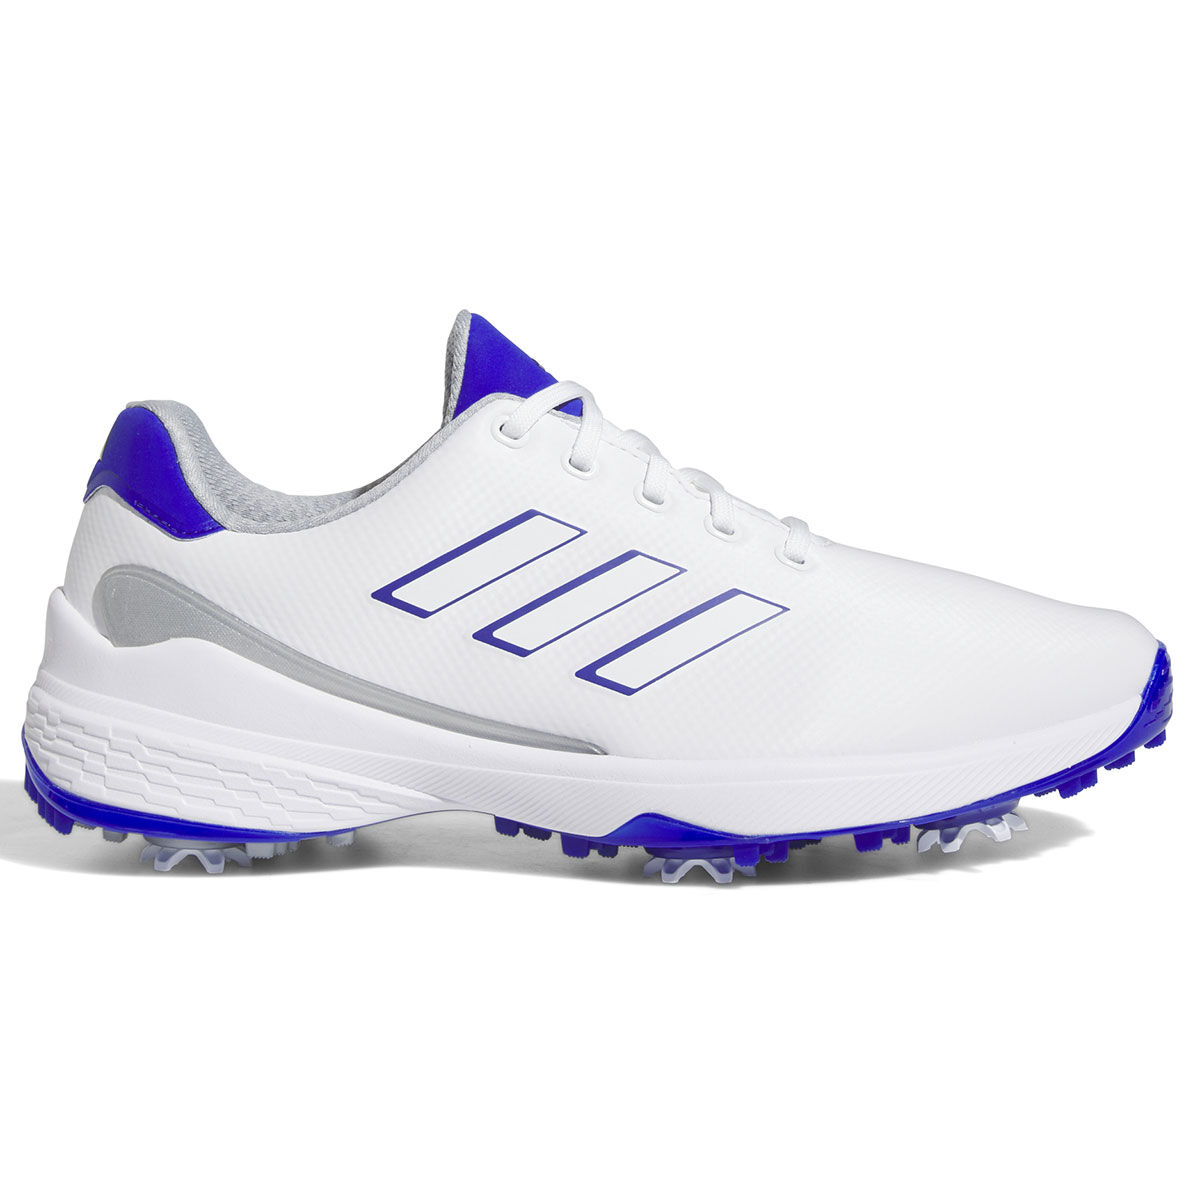 adidas Men’s ZG23 Waterproof Spiked Golf Shoes, Mens, White/blue fusion/lucid blue, 9 | American Golf